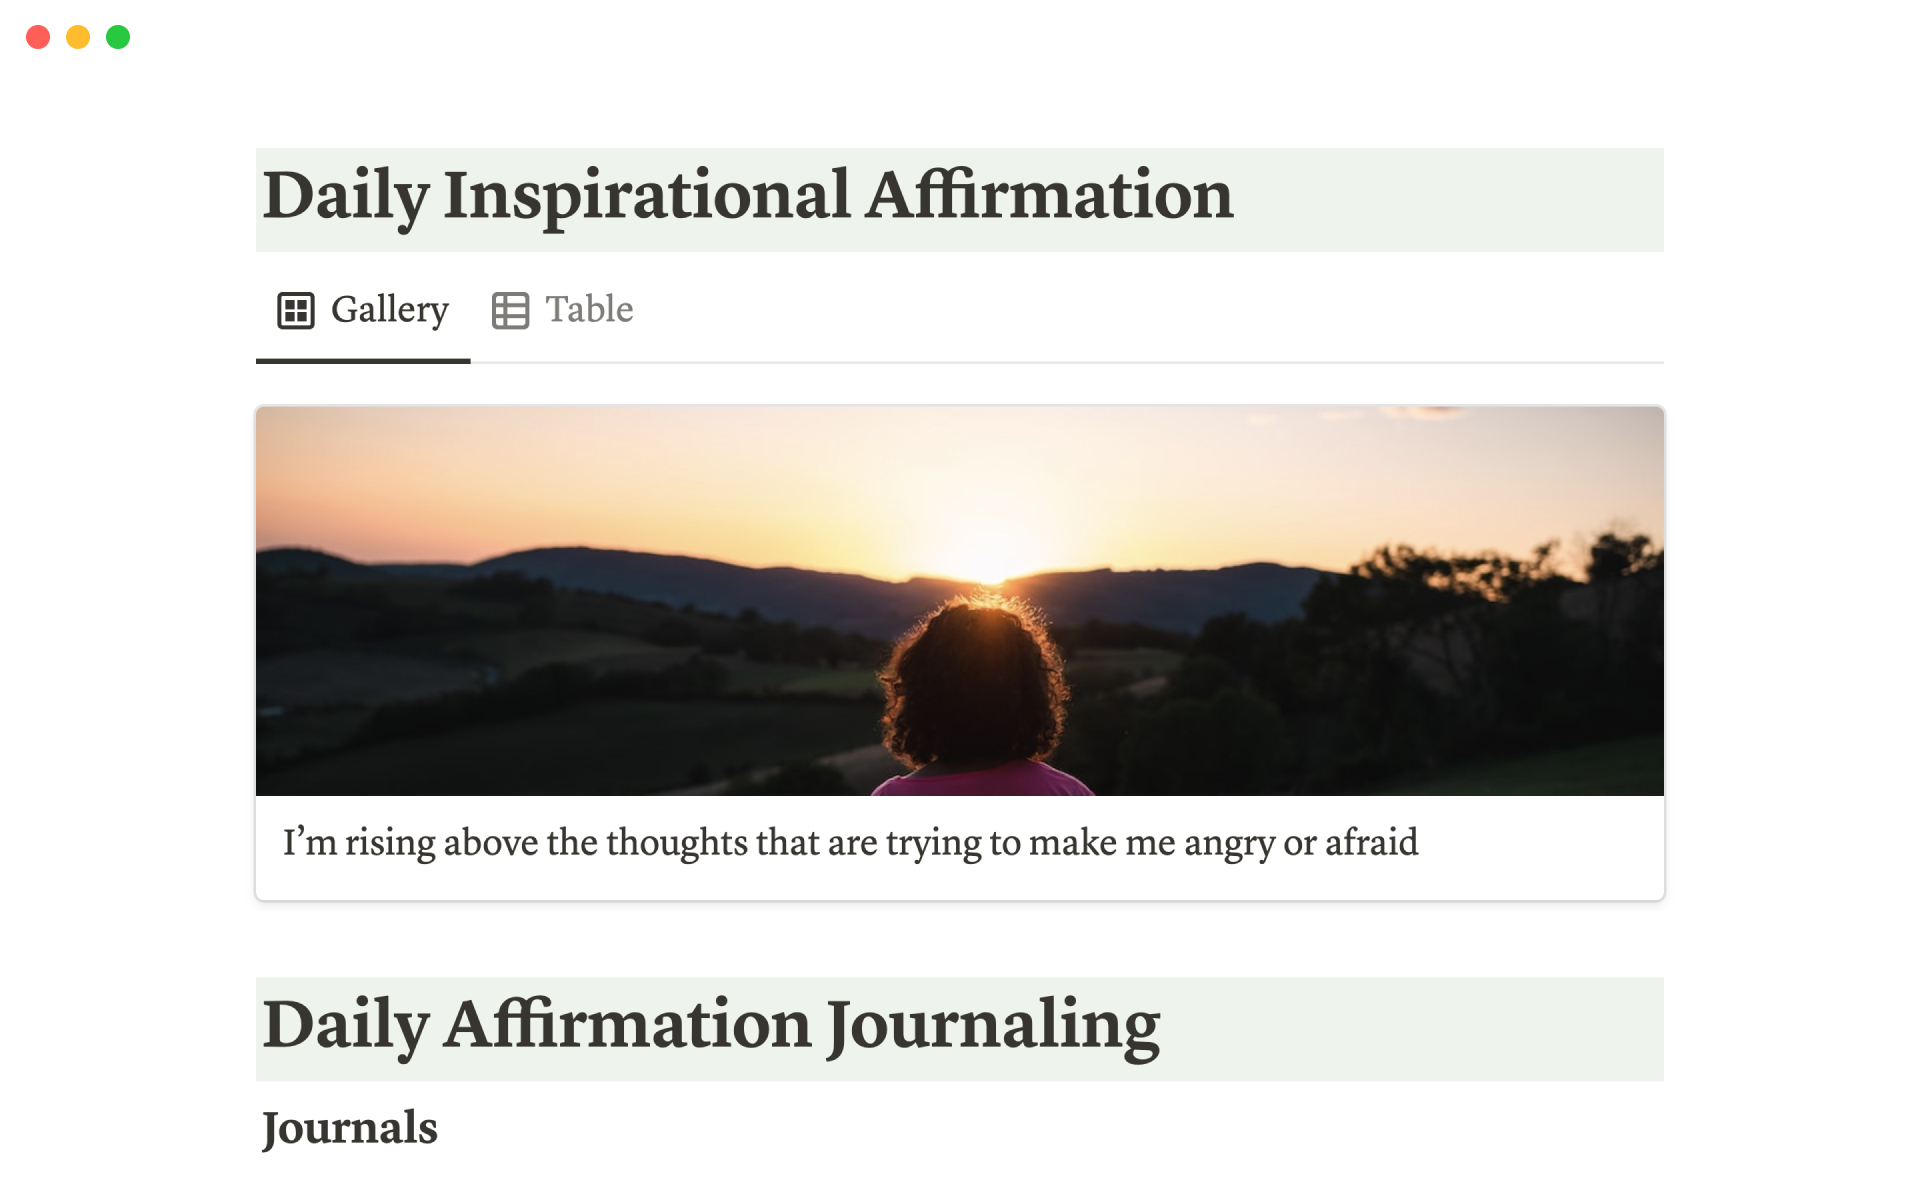 Keep track of your positive affirmations and journal entries.